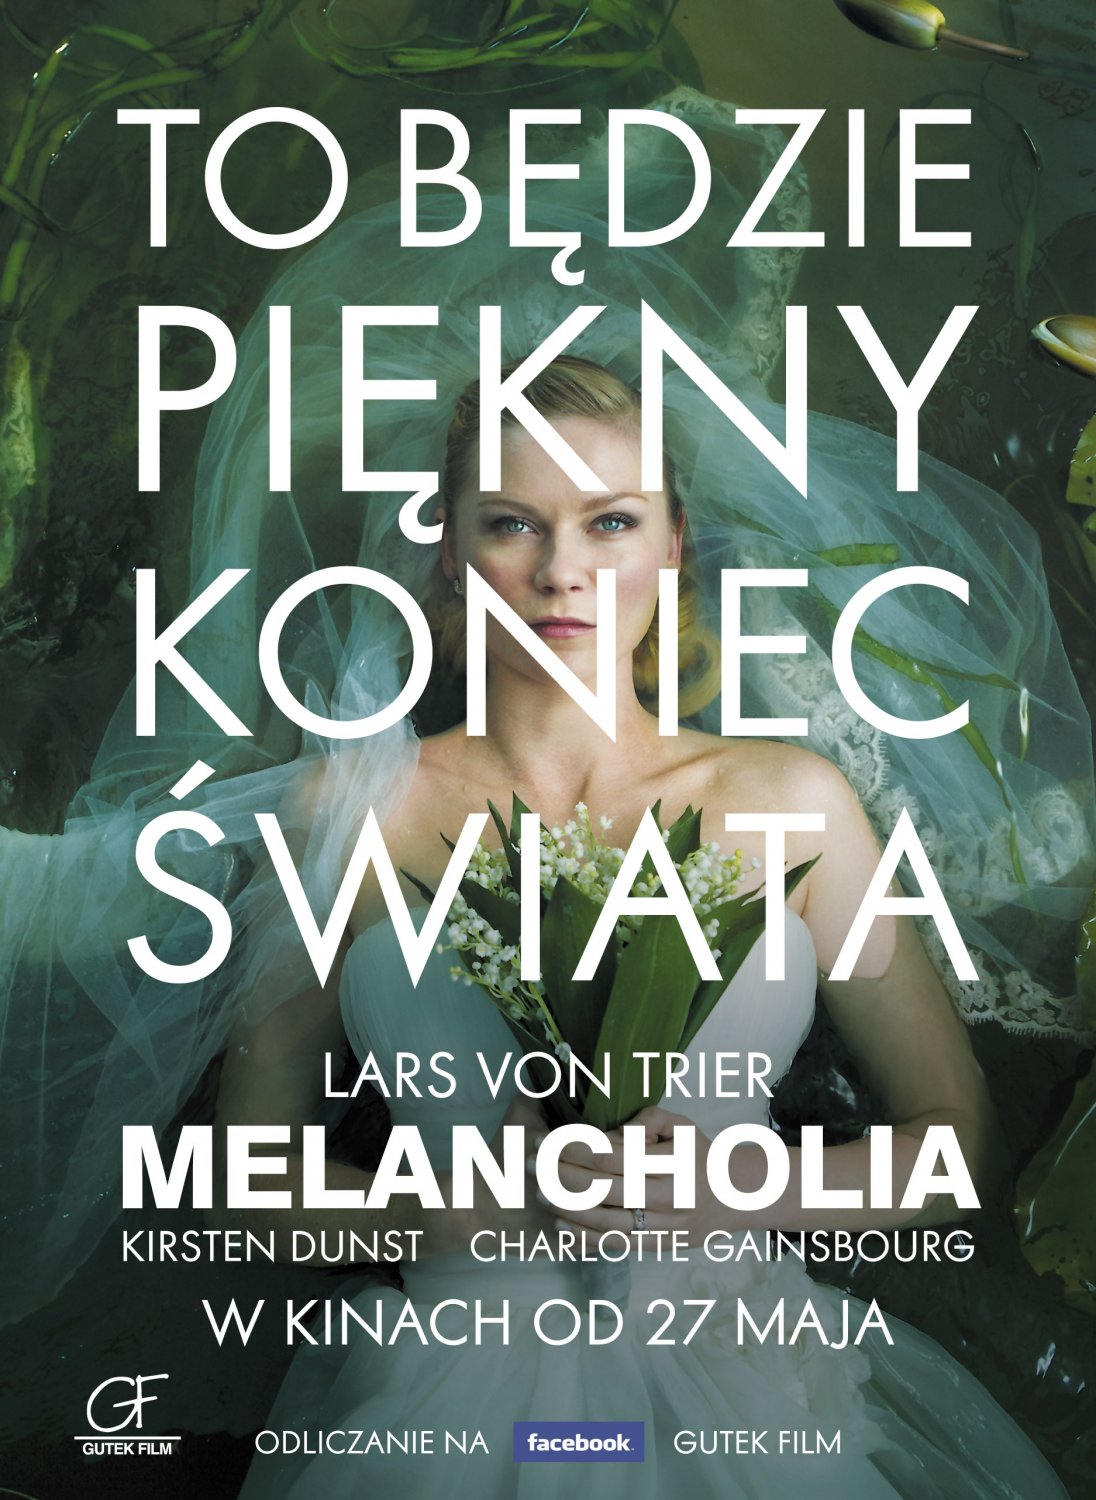 Extra Large Movie Poster Image for Melancholia (#2 of 11)